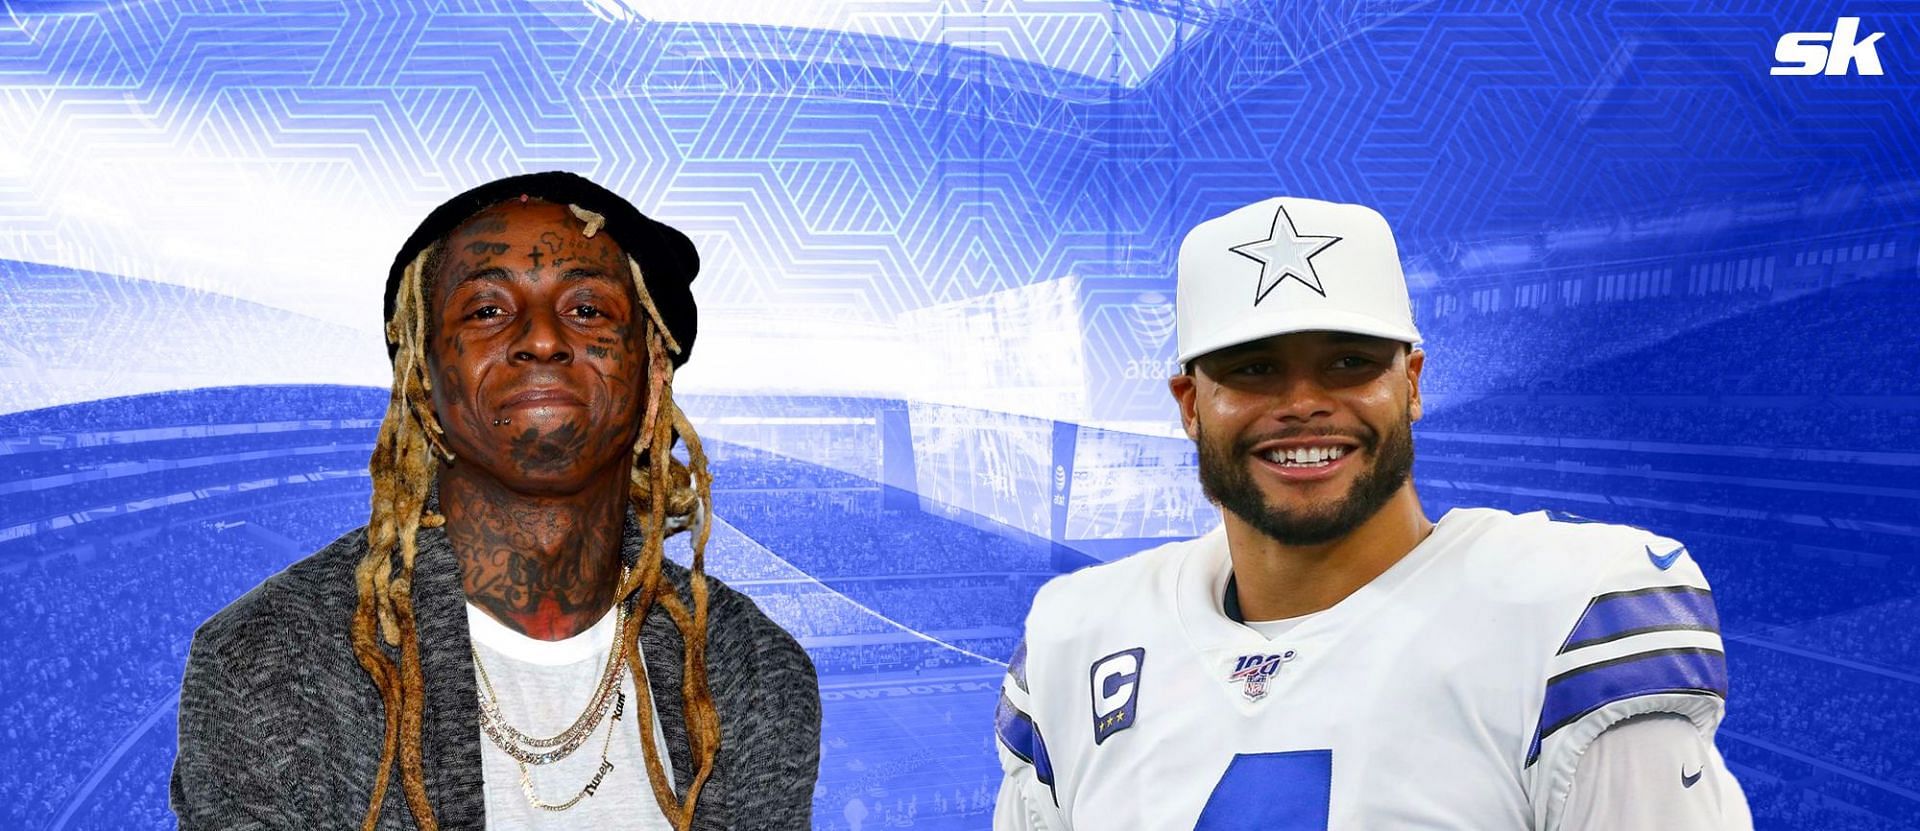 Lil Wayne goes all-out with F-bomb-laced compliment for Dak Prescott